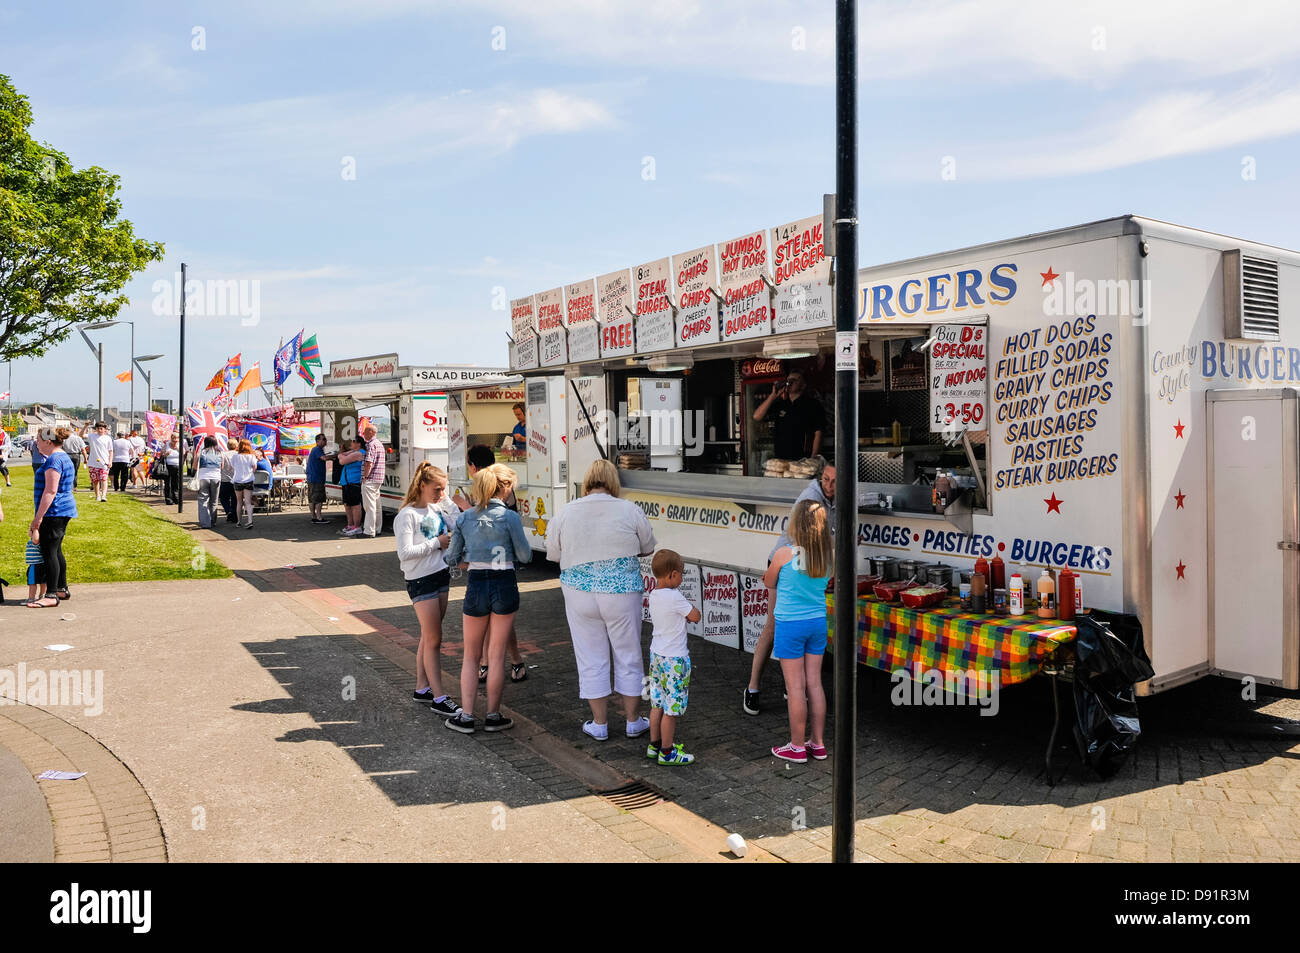 Mobile fast food vans at an outdoor event Stock Photo - Alamy